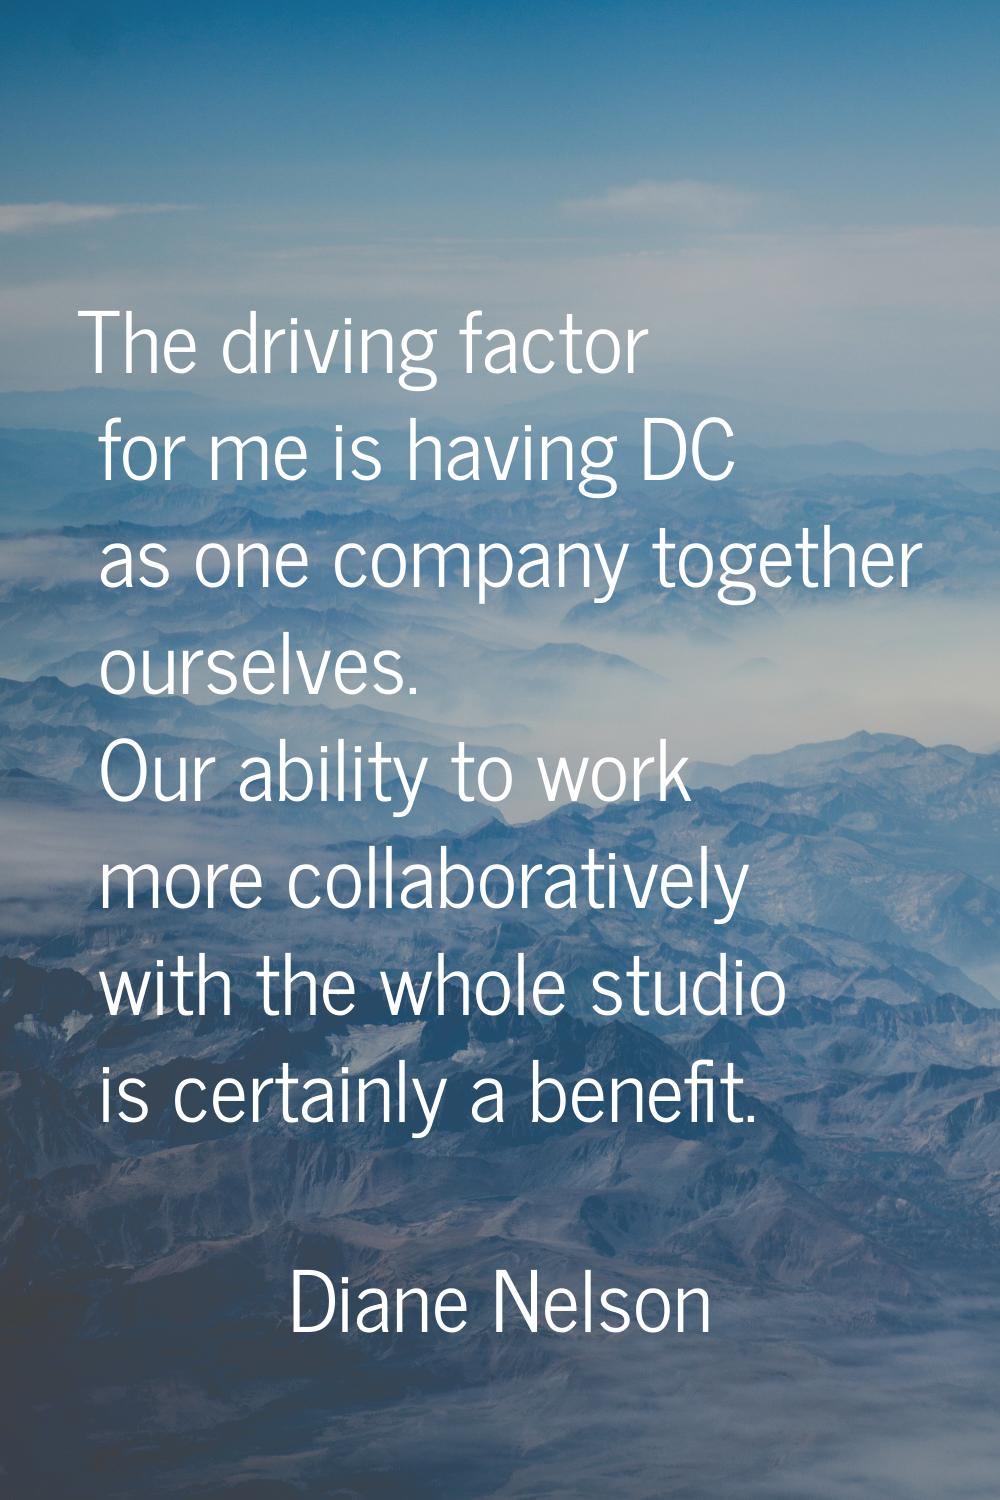 The driving factor for me is having DC as one company together ourselves. Our ability to work more 